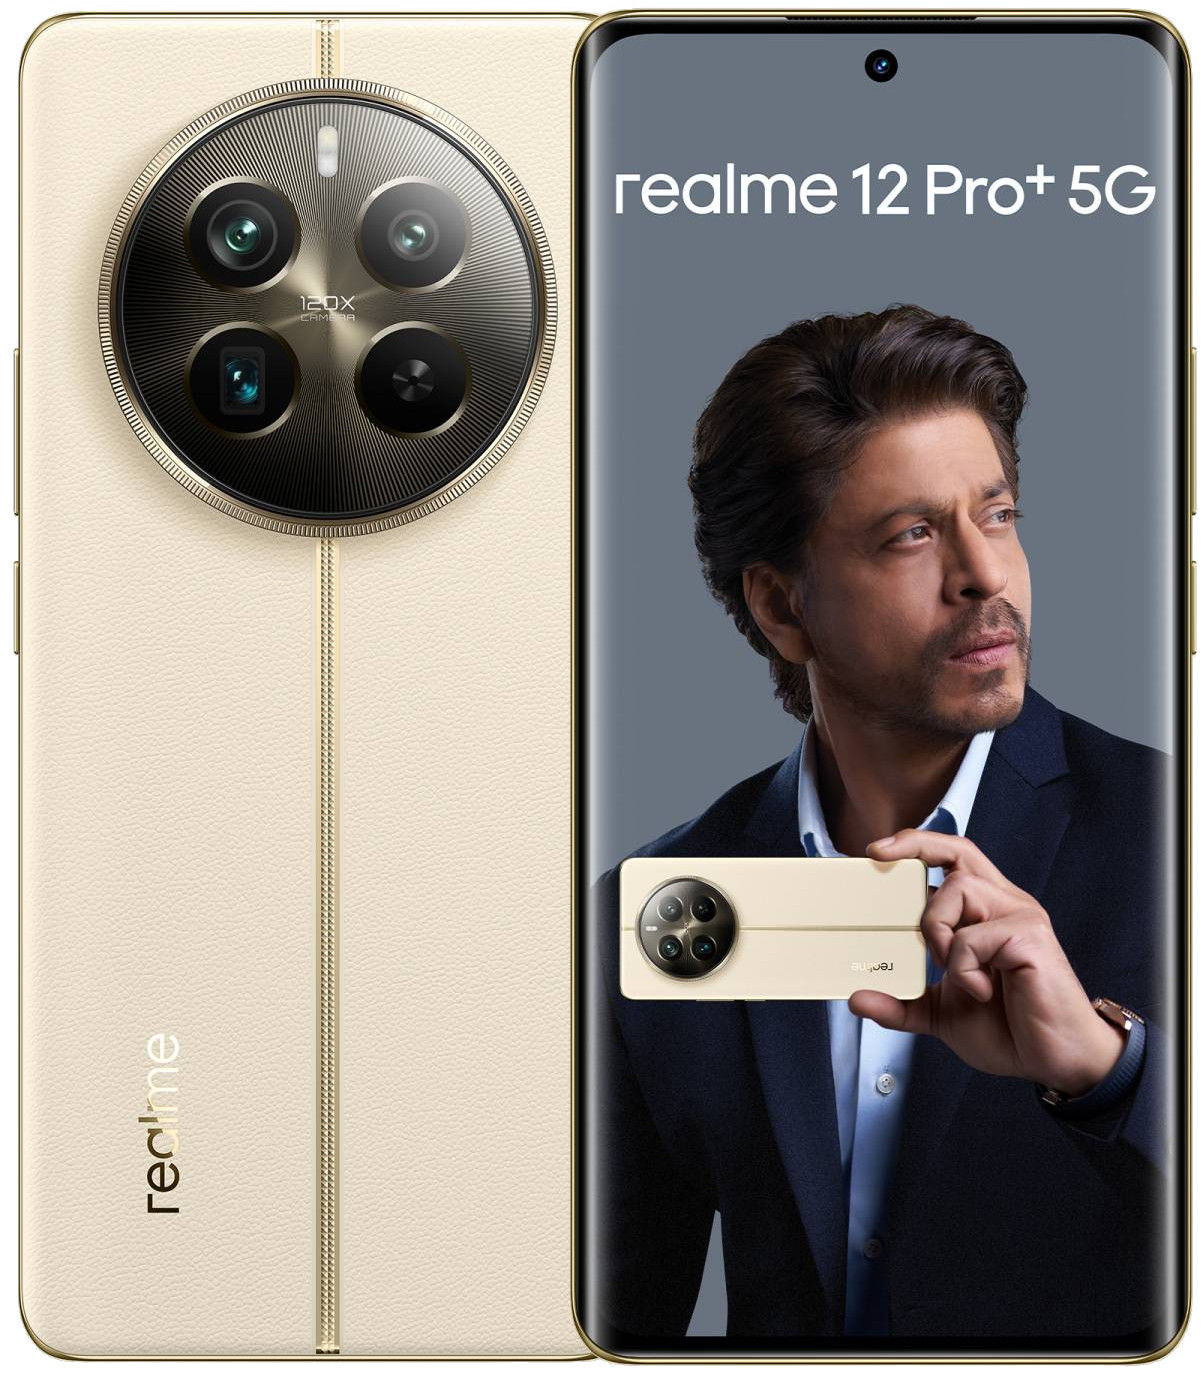 Realme 12 Pro: Realme 12 Pro Plus and Realme 12 Pro launched in India with  impressive cameras, Snapdragon chipset - The Economic Times